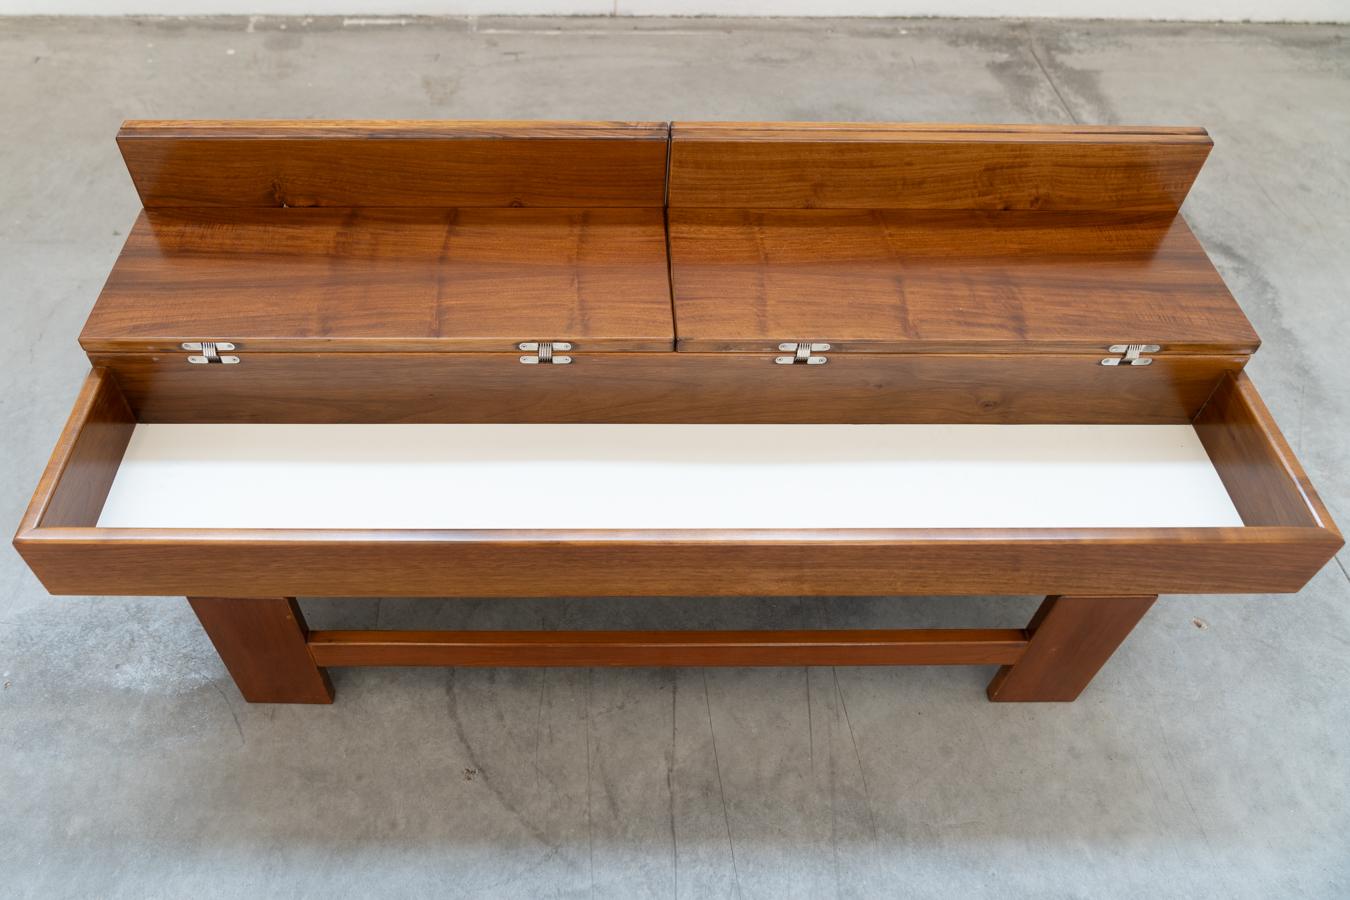 Walnut coffee table with compartment by Michelucci, 1970 For Sale 5